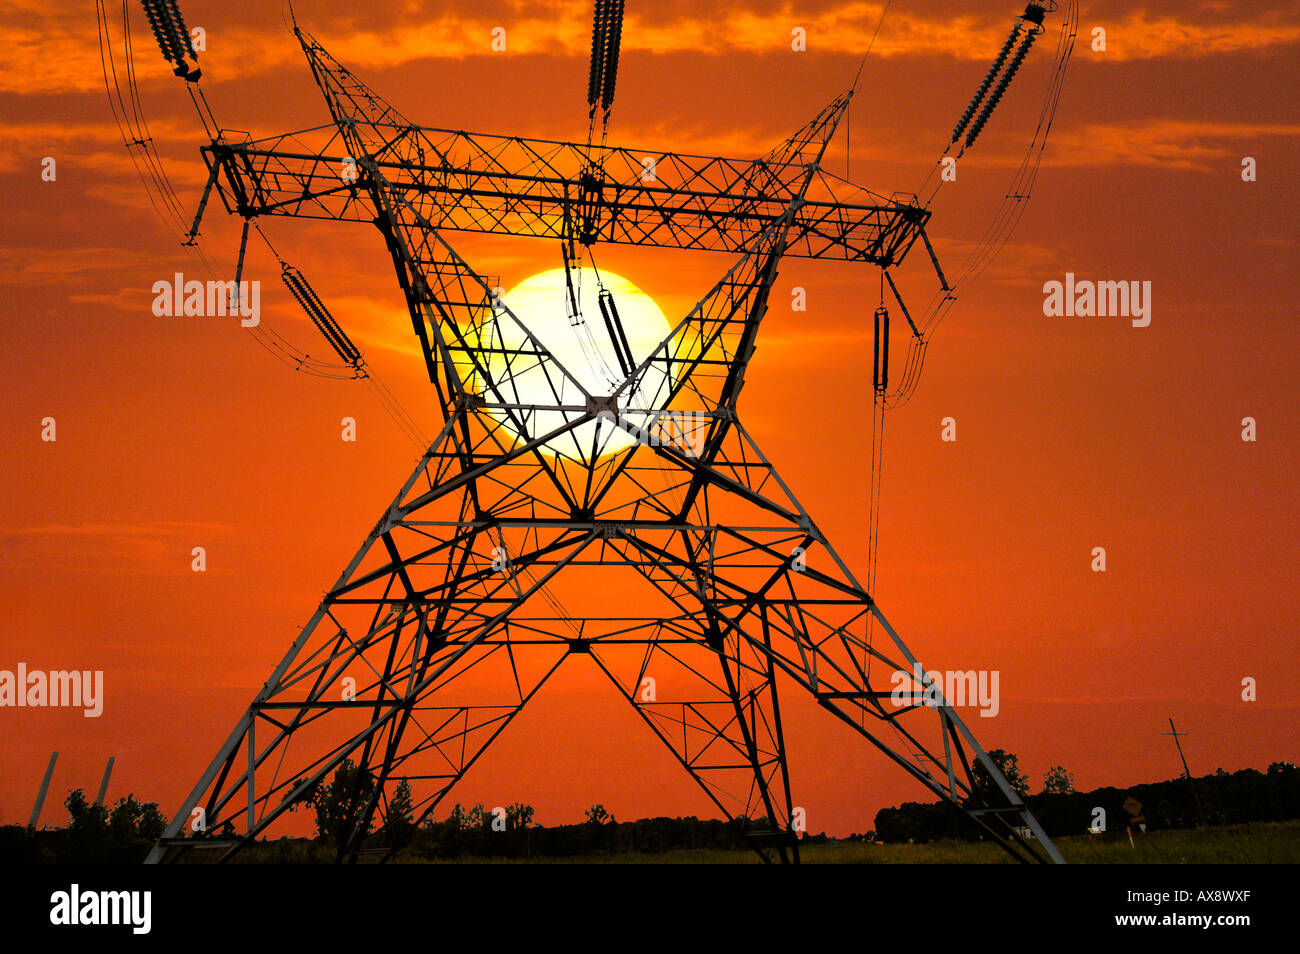 Power lines against a setting sun Stock Photo